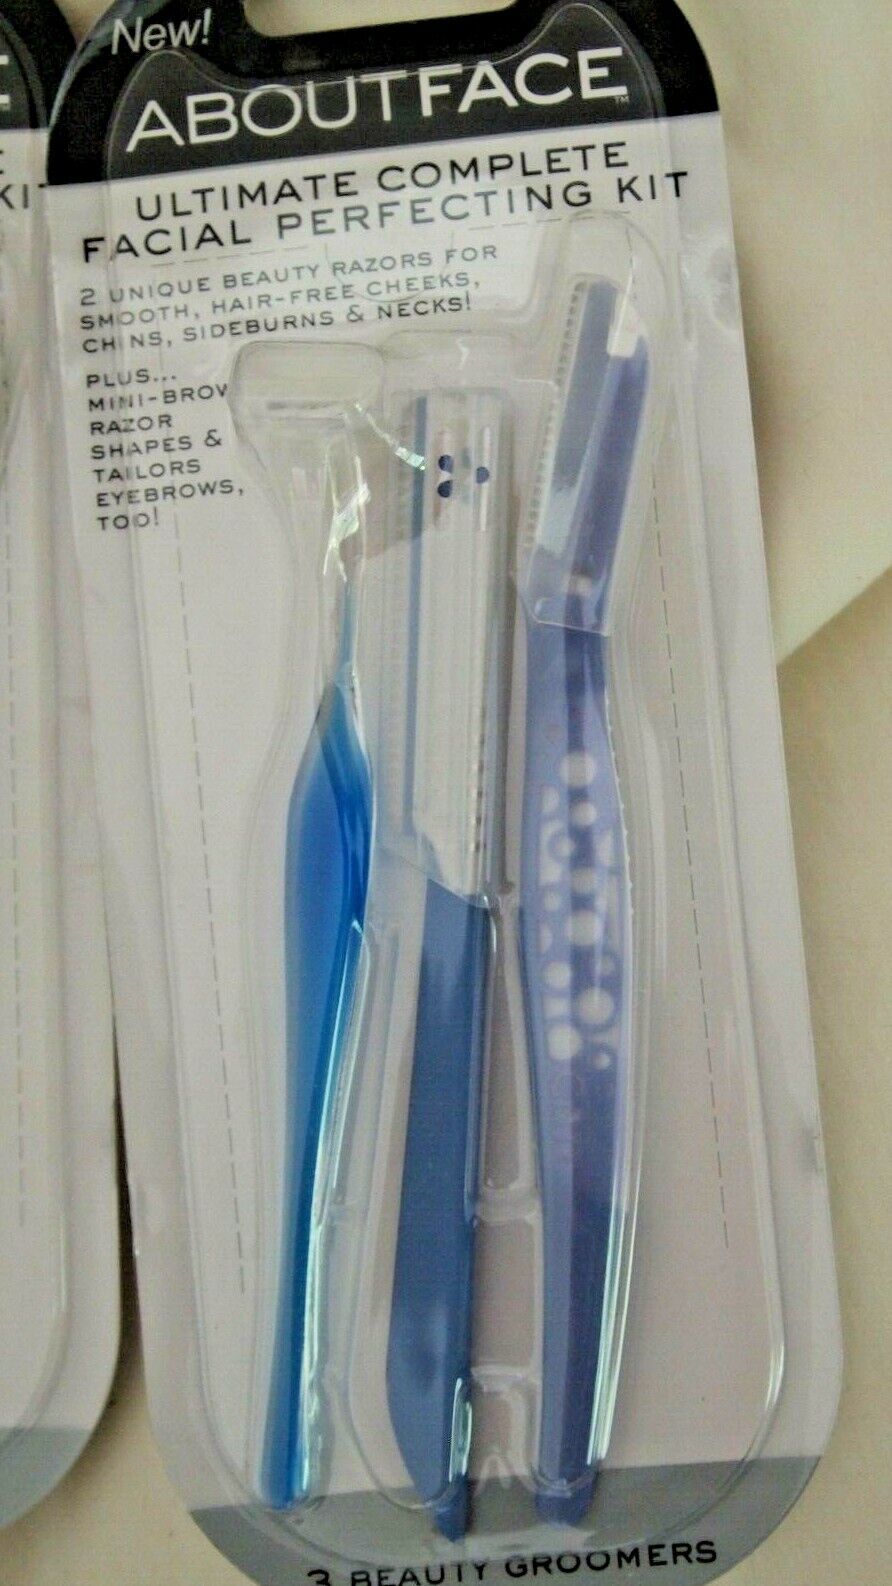 AboutFace by Kai Japan Facial Razor Kit  4 Packs of 3 Shavers  12 Total AboutFace Does Not Apply - фотография #2